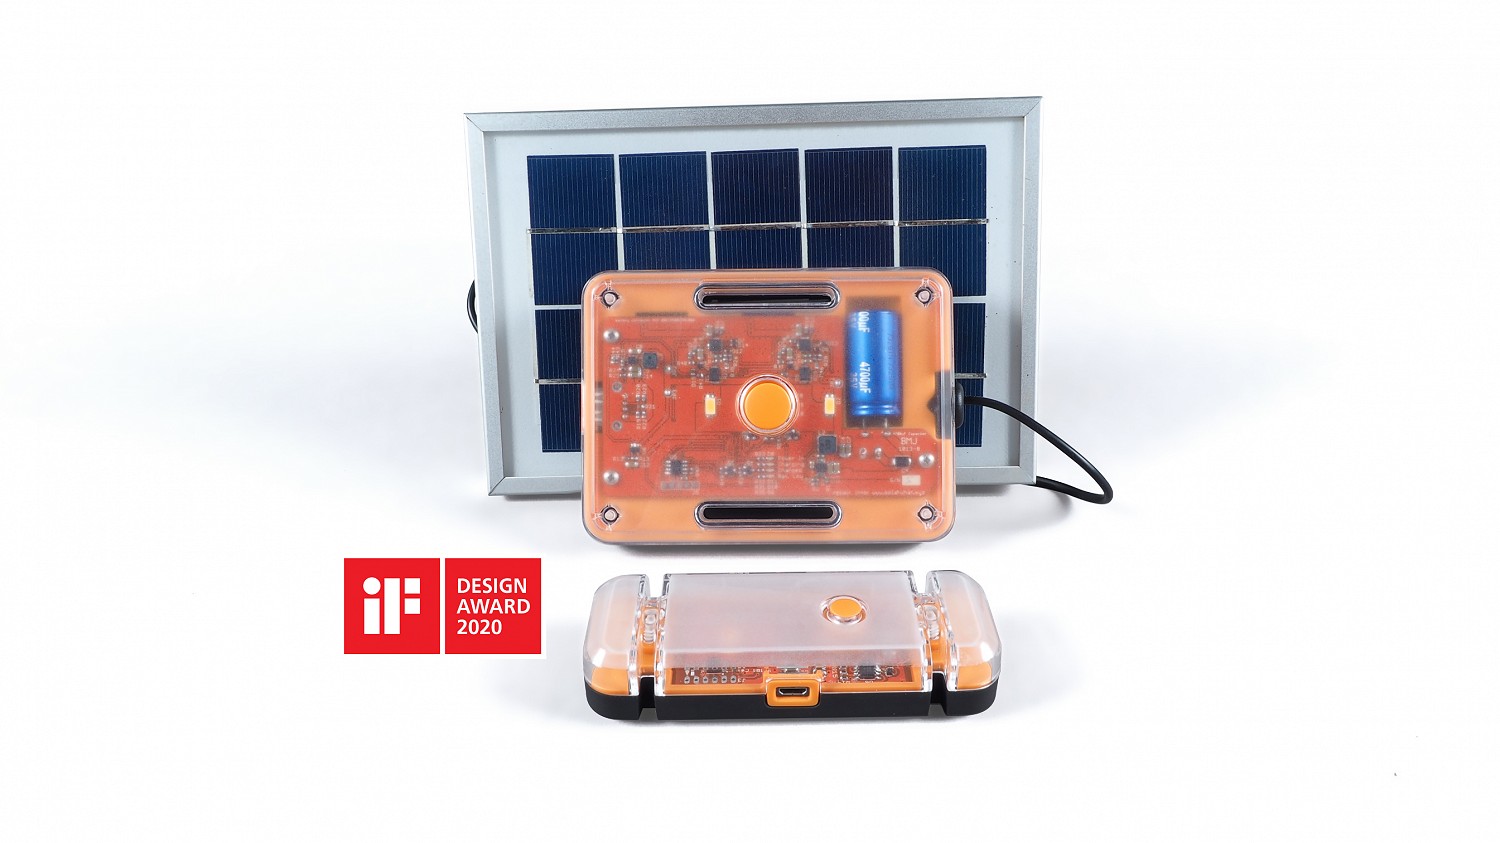 The Solar What device - a fully repairable, recyclable solar-powered light and charger